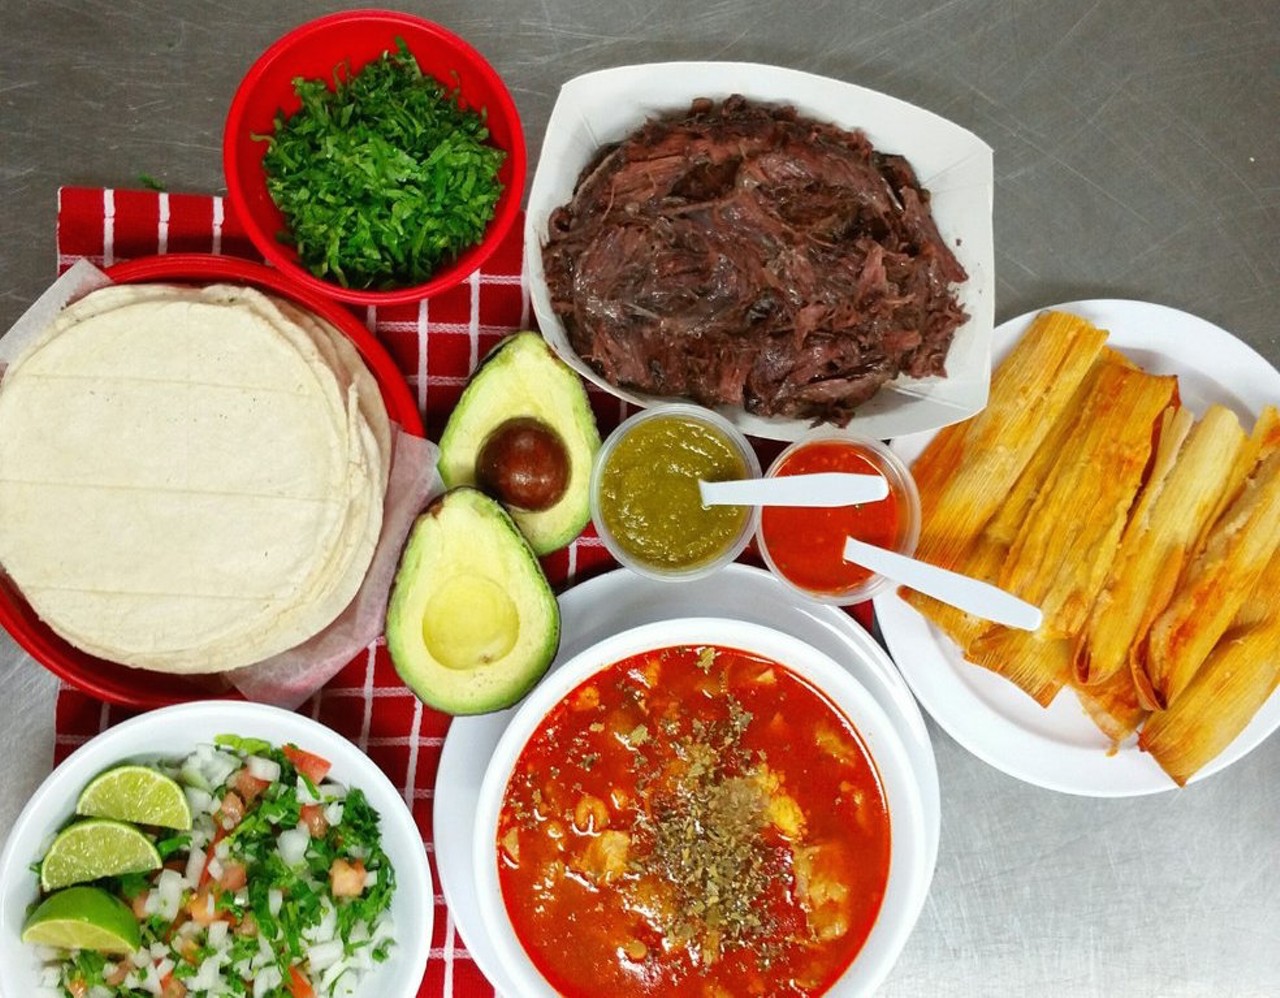 Morenita Barbacoa
4302 S Flores St, (210) 409-2783, facebook.com/MORENITABARBACOA
Not far from Rudy’s Seafood you’ll find Morenita Barbacoa, not to be confused with La Morenita Tortilleria. This South Side outpost not only dishes out flavorful barbacoa, but also stuffed tamales. Make plans to come when MB is open on the weekends and trust us, you’ll be eating good here.
Photo via Yelp / Morenita Barbacoa